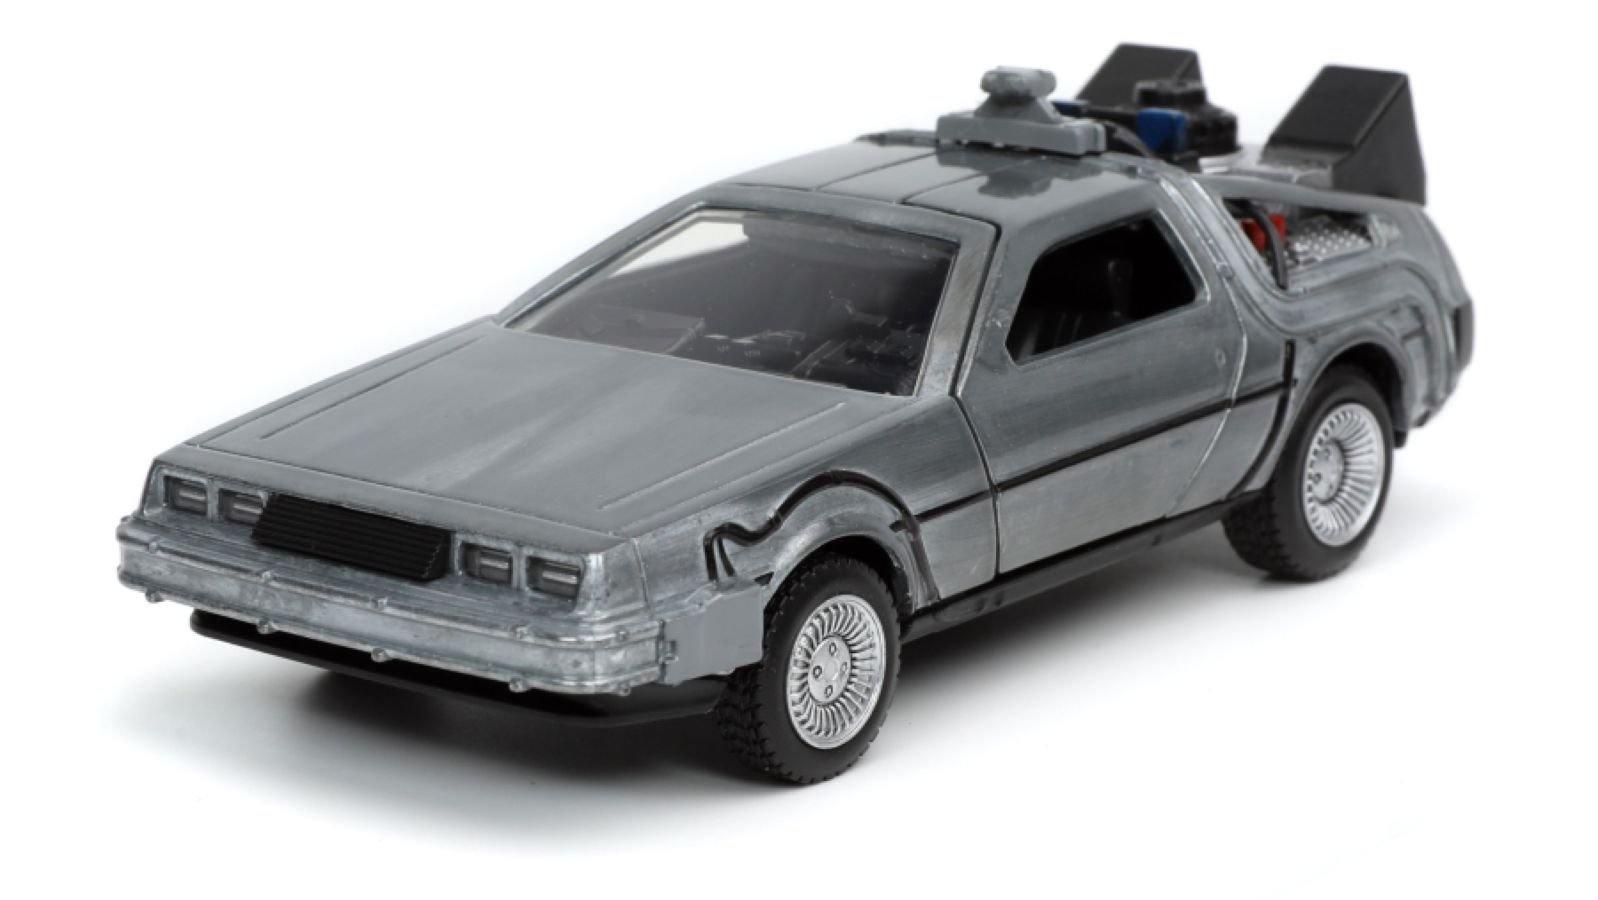 JAD32185 Back to the Future - Time Machine Free Rolling 1:32 Scale Hollywood Ride - Jada Toys - Titan Pop Culture